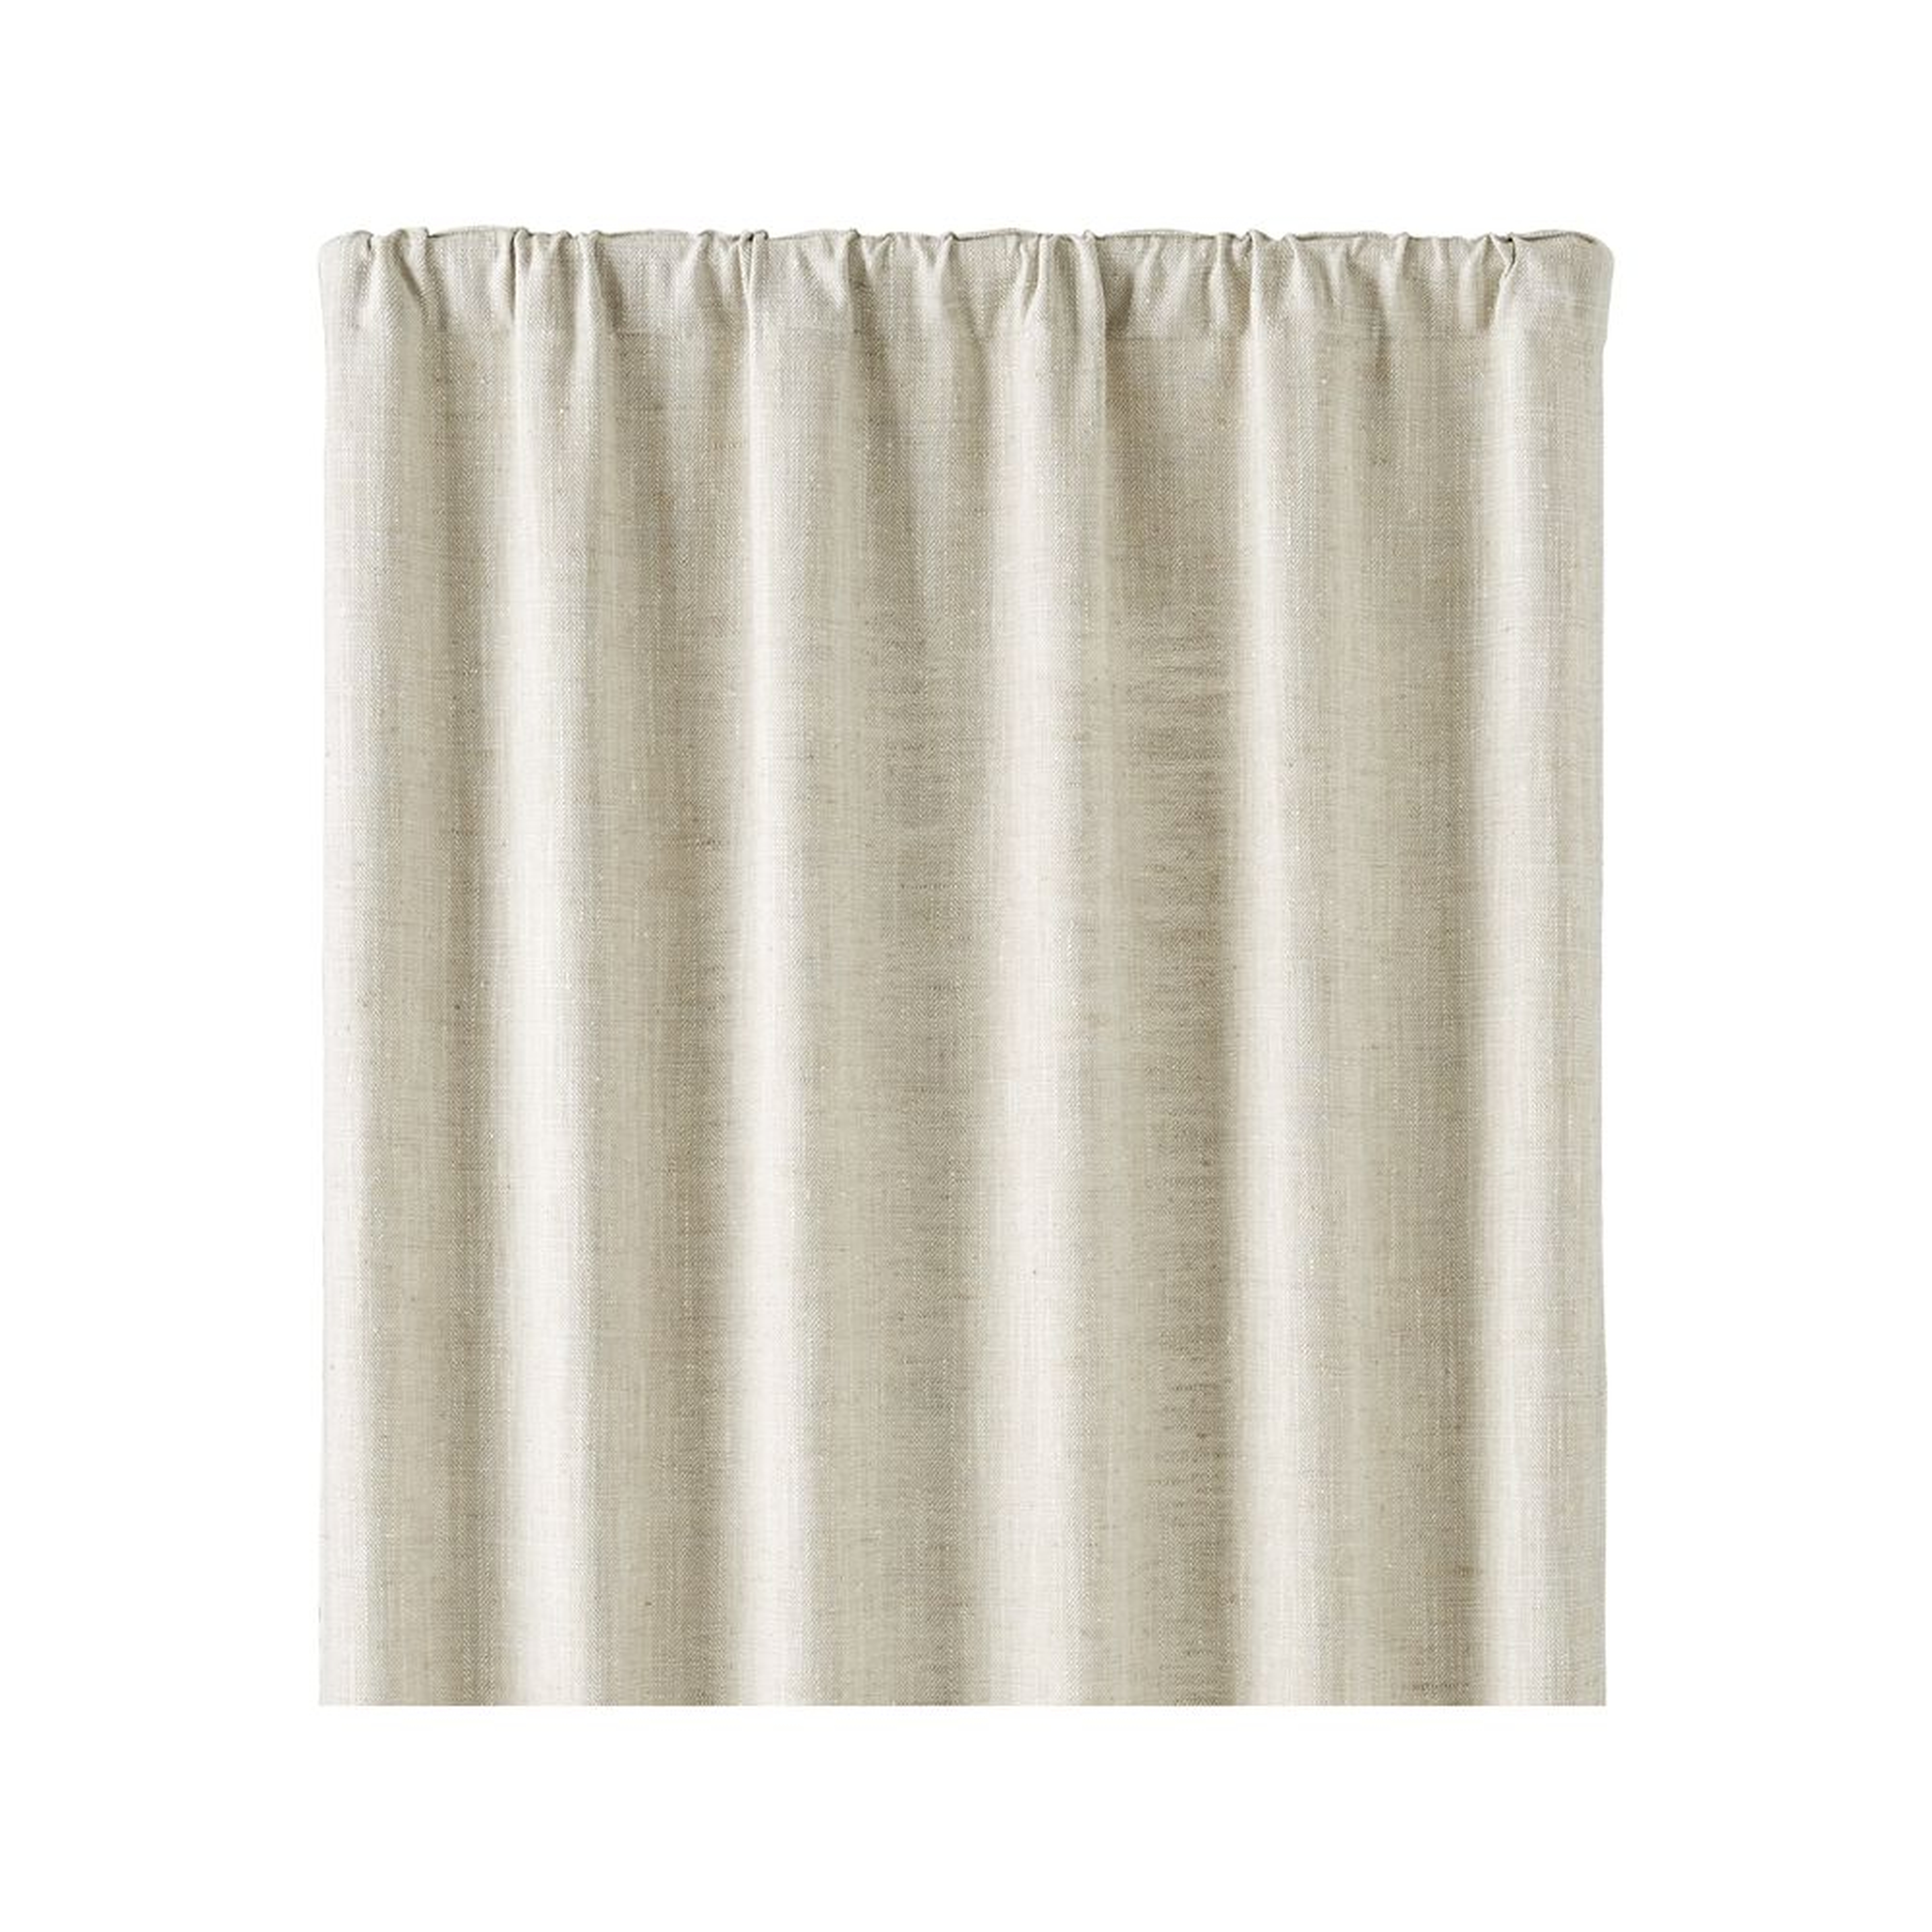 Reid Natural 48"x108" Curtain Panel - Crate and Barrel - Crate and Barrel